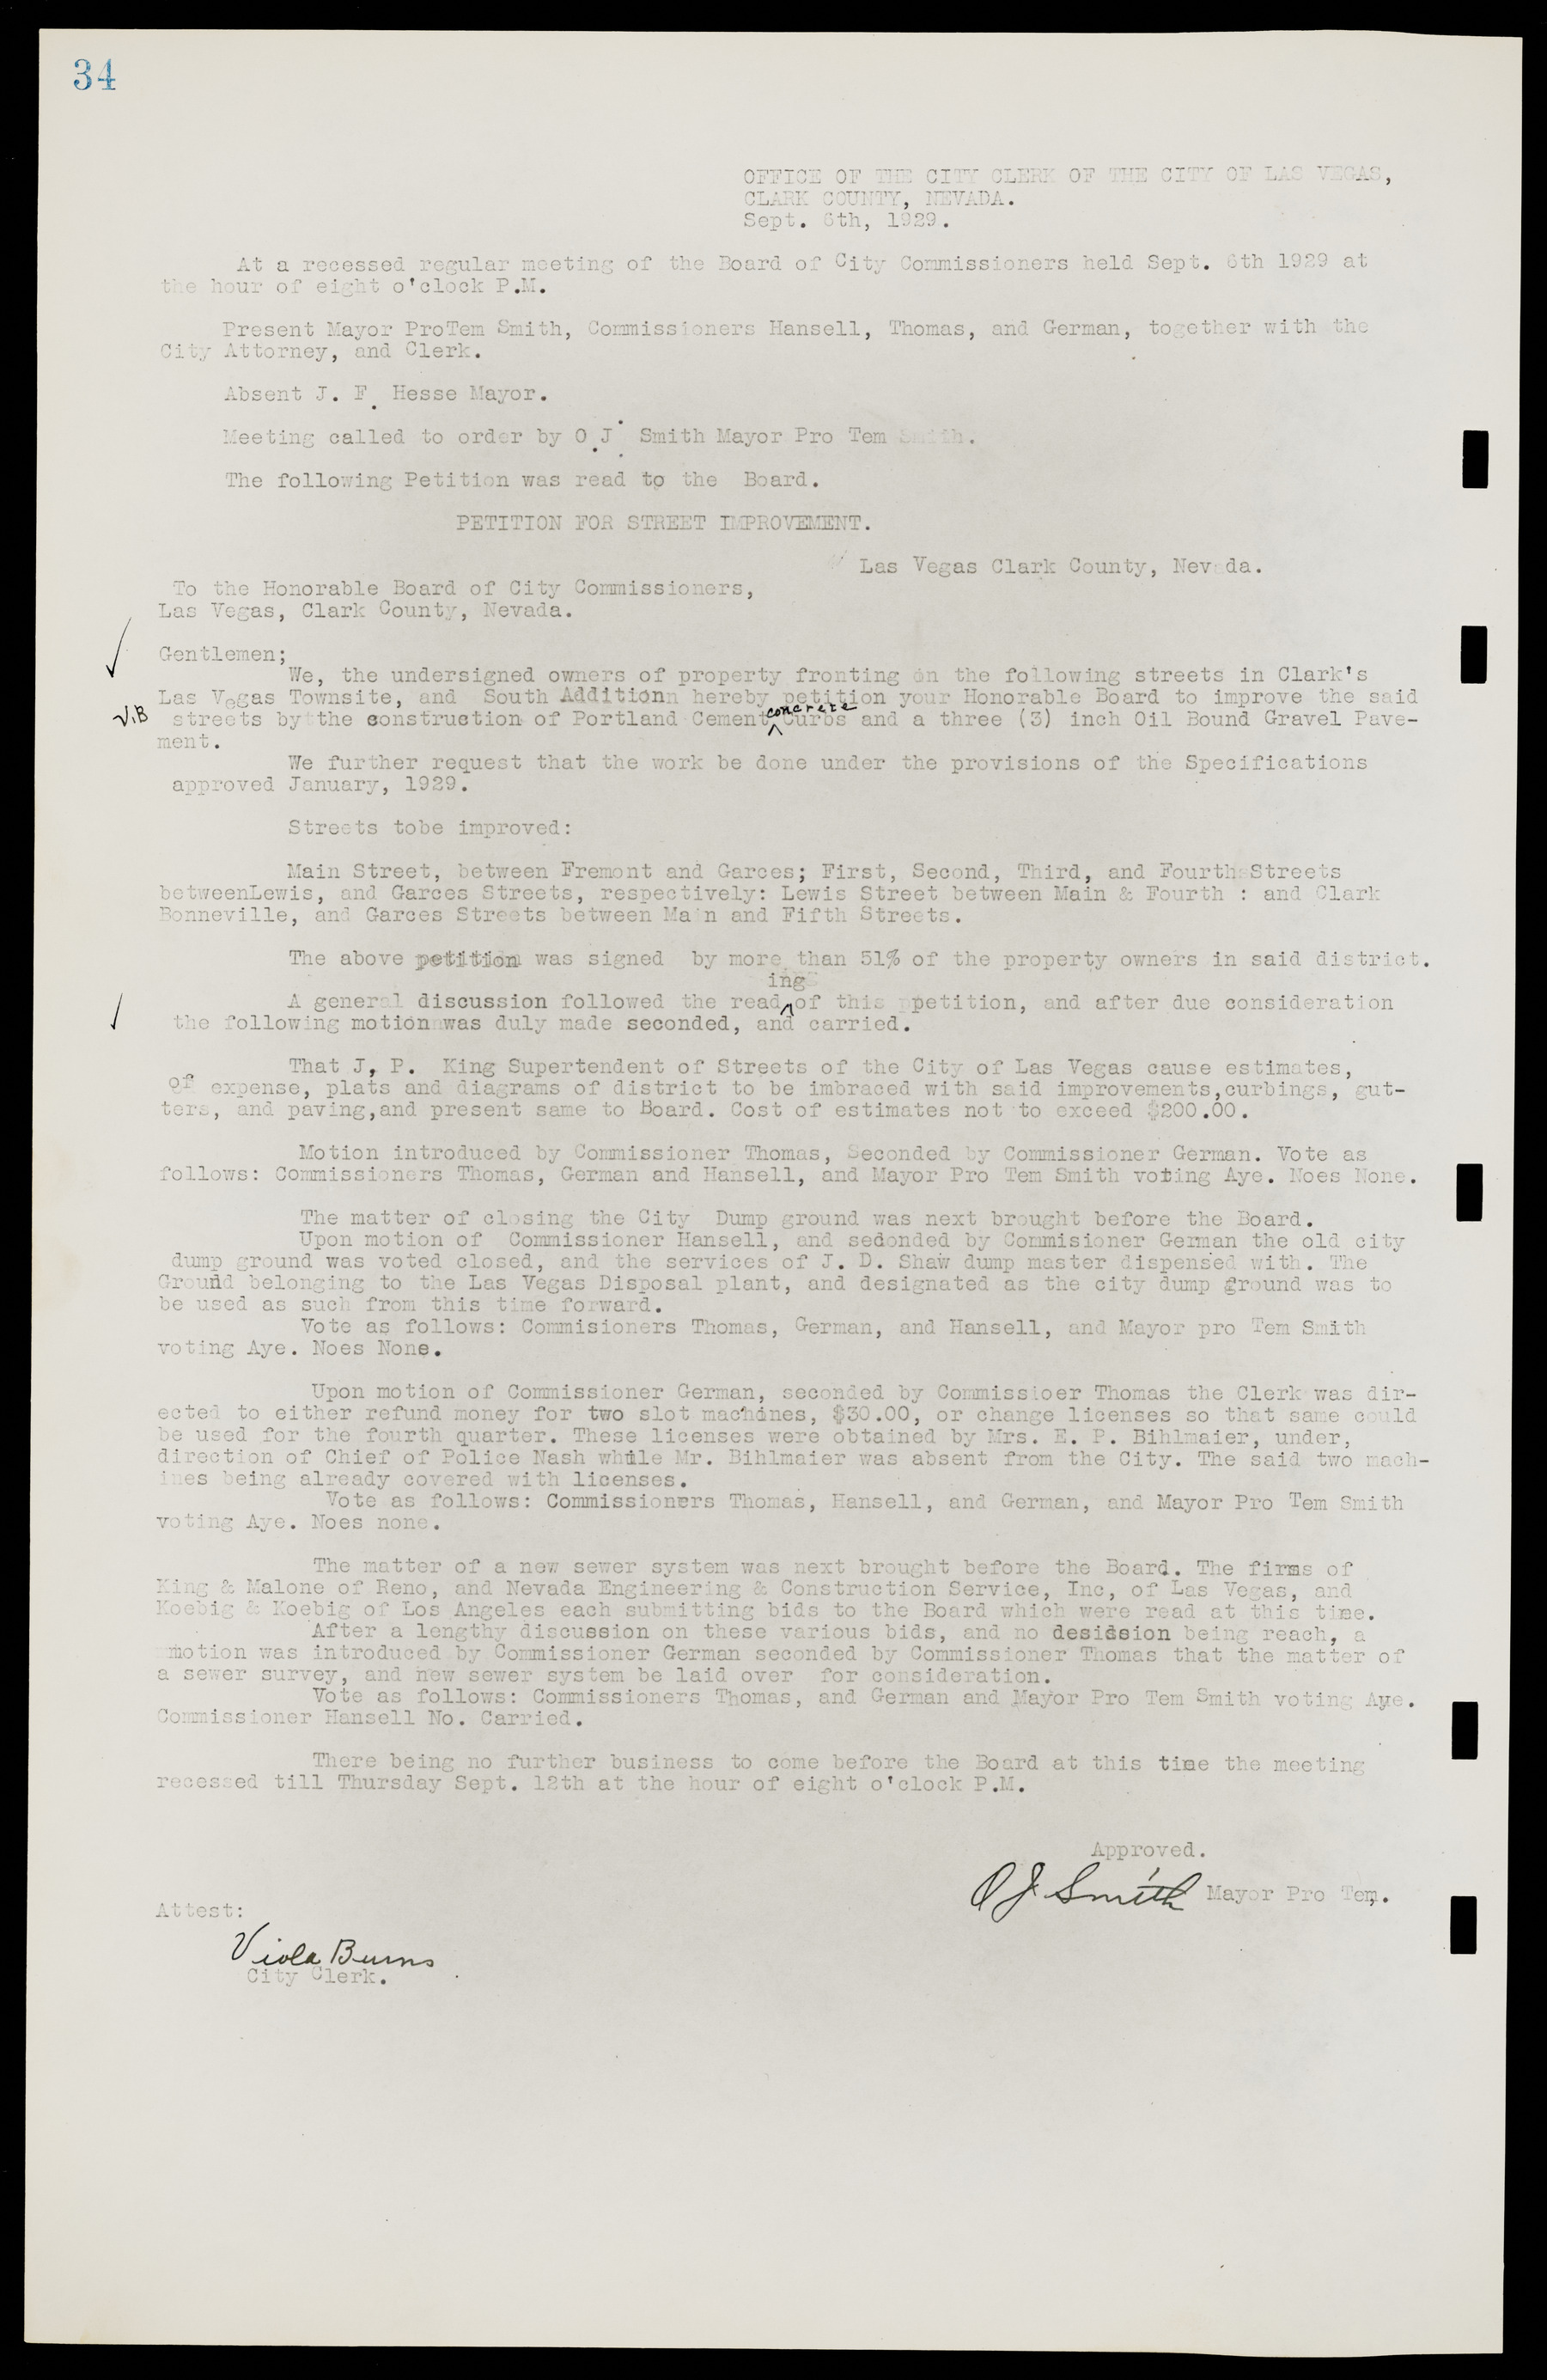 Las Vegas City Commission Minutes, May 14, 1929 to February 11, 1937, lvc000003-40